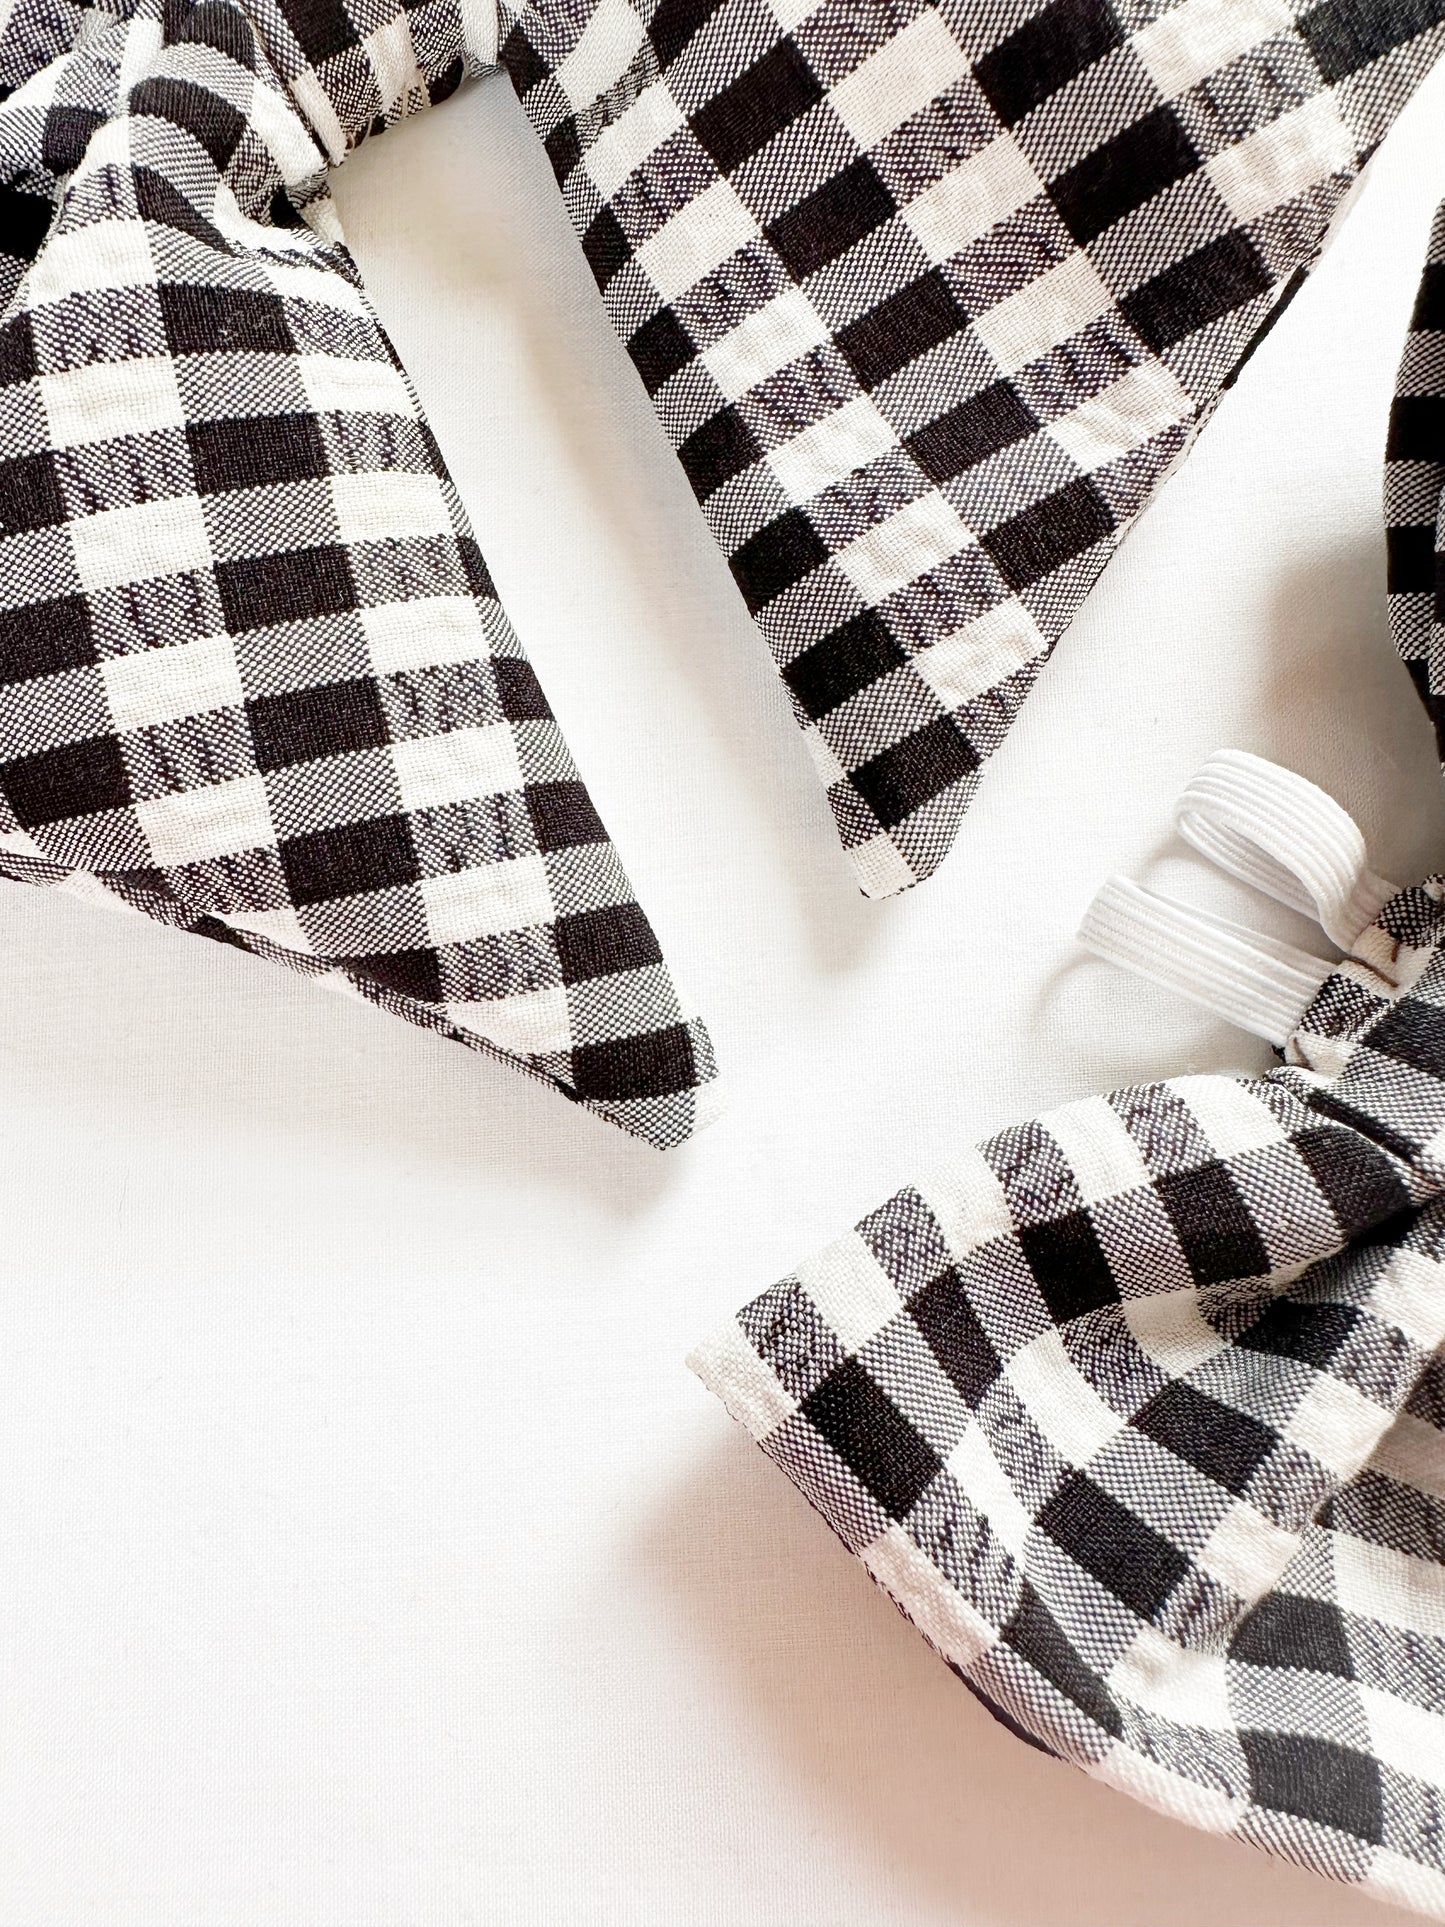 Hair Bow and dog bow tie gift set in monochrome gingham